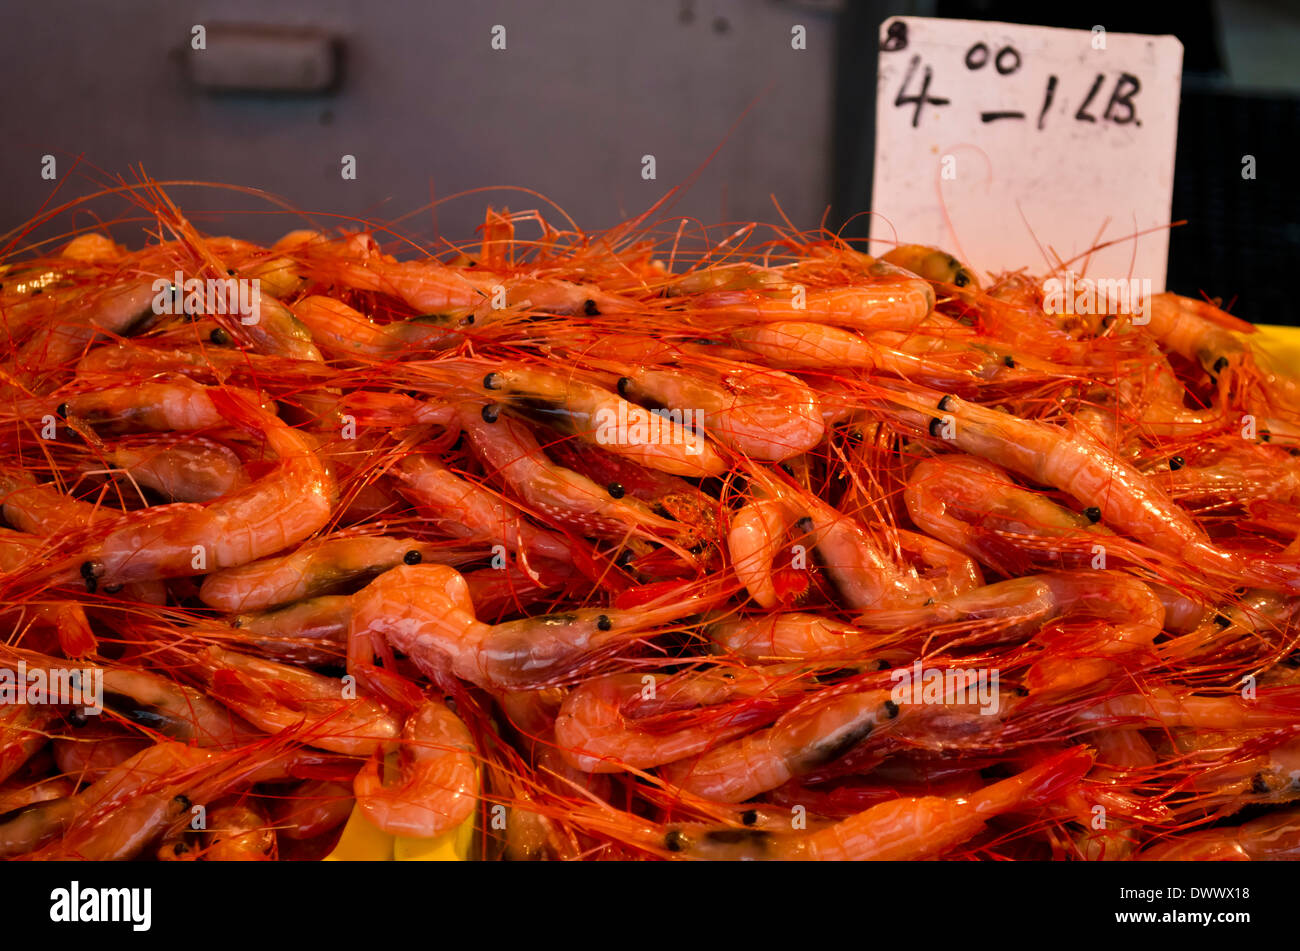 Pile of freshly caught Sidestripe or Giant Shrimp for sale at the fish market in Steveston, British Columbia, Canada. Stock Photo